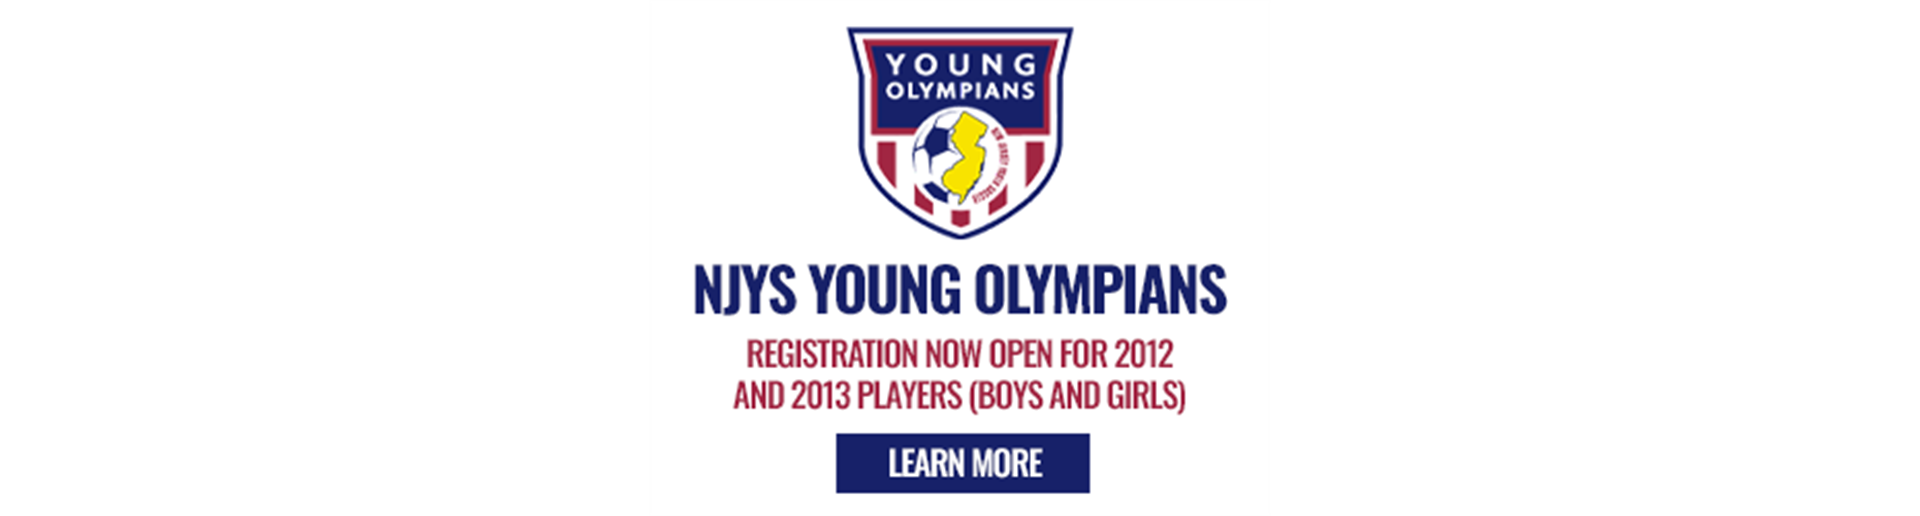 NJYS Young Olympians Program (YOP) Registration is now open